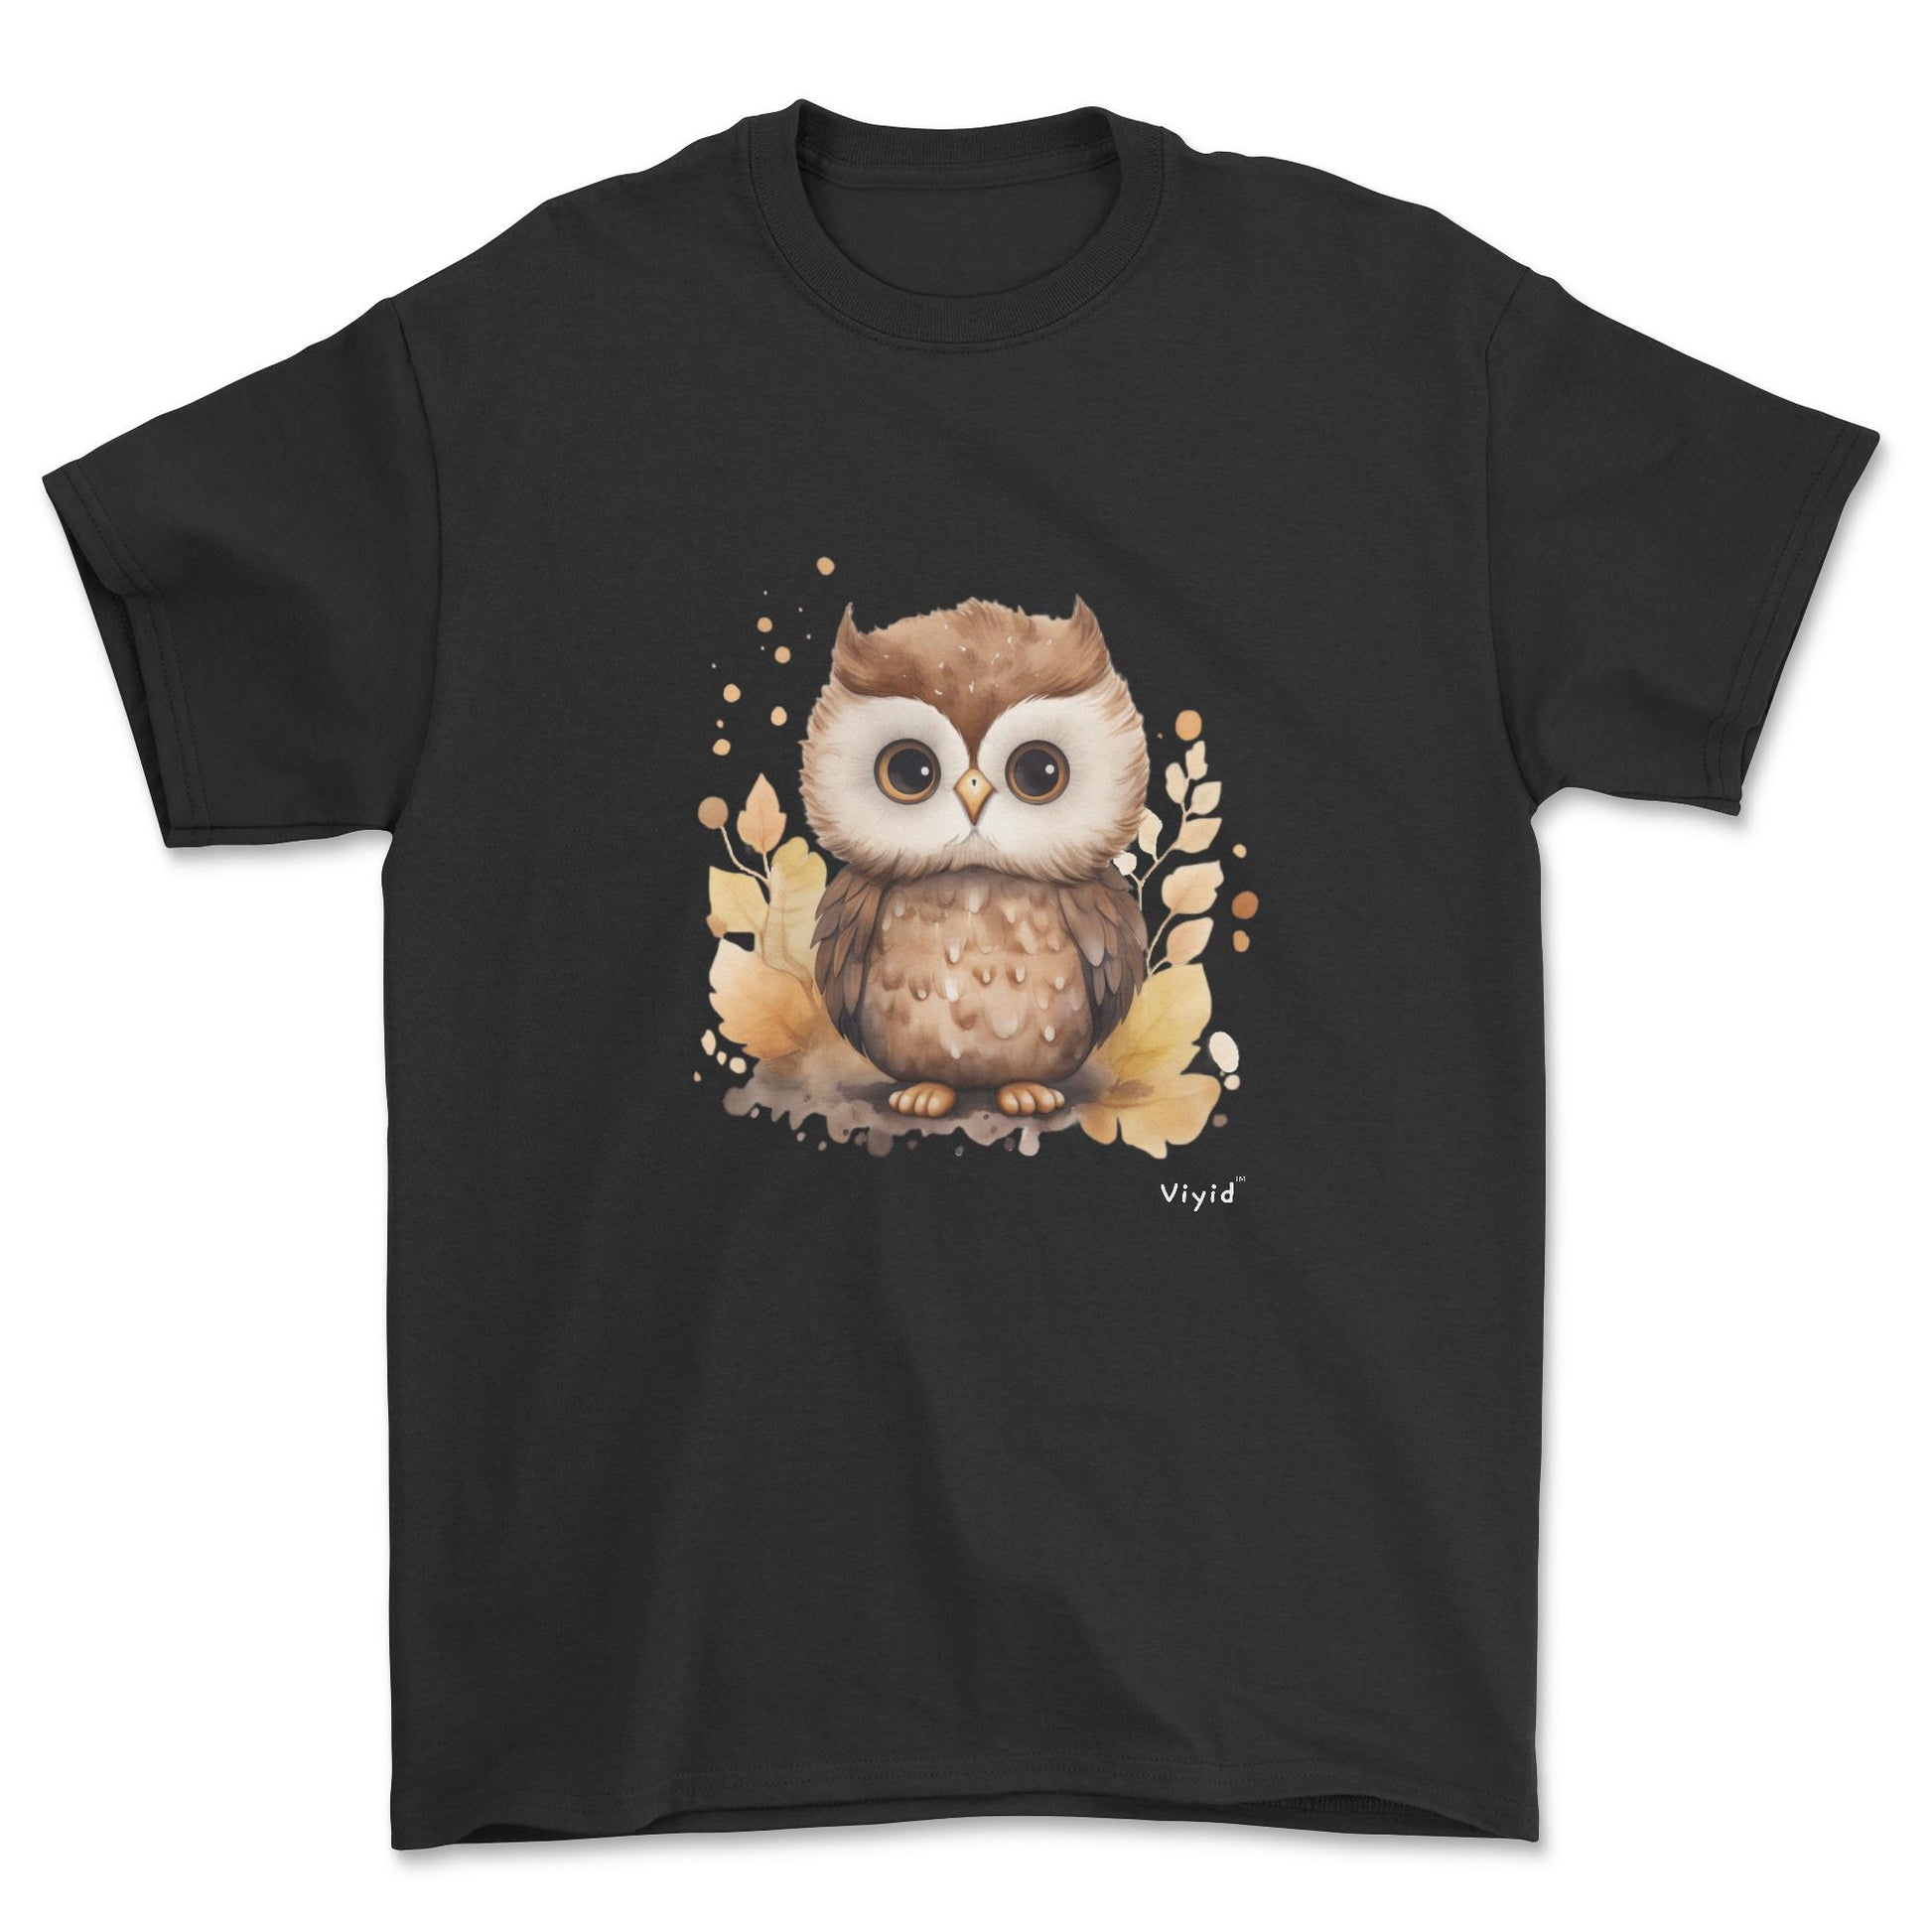 nocturnal owl youth t-shirt black